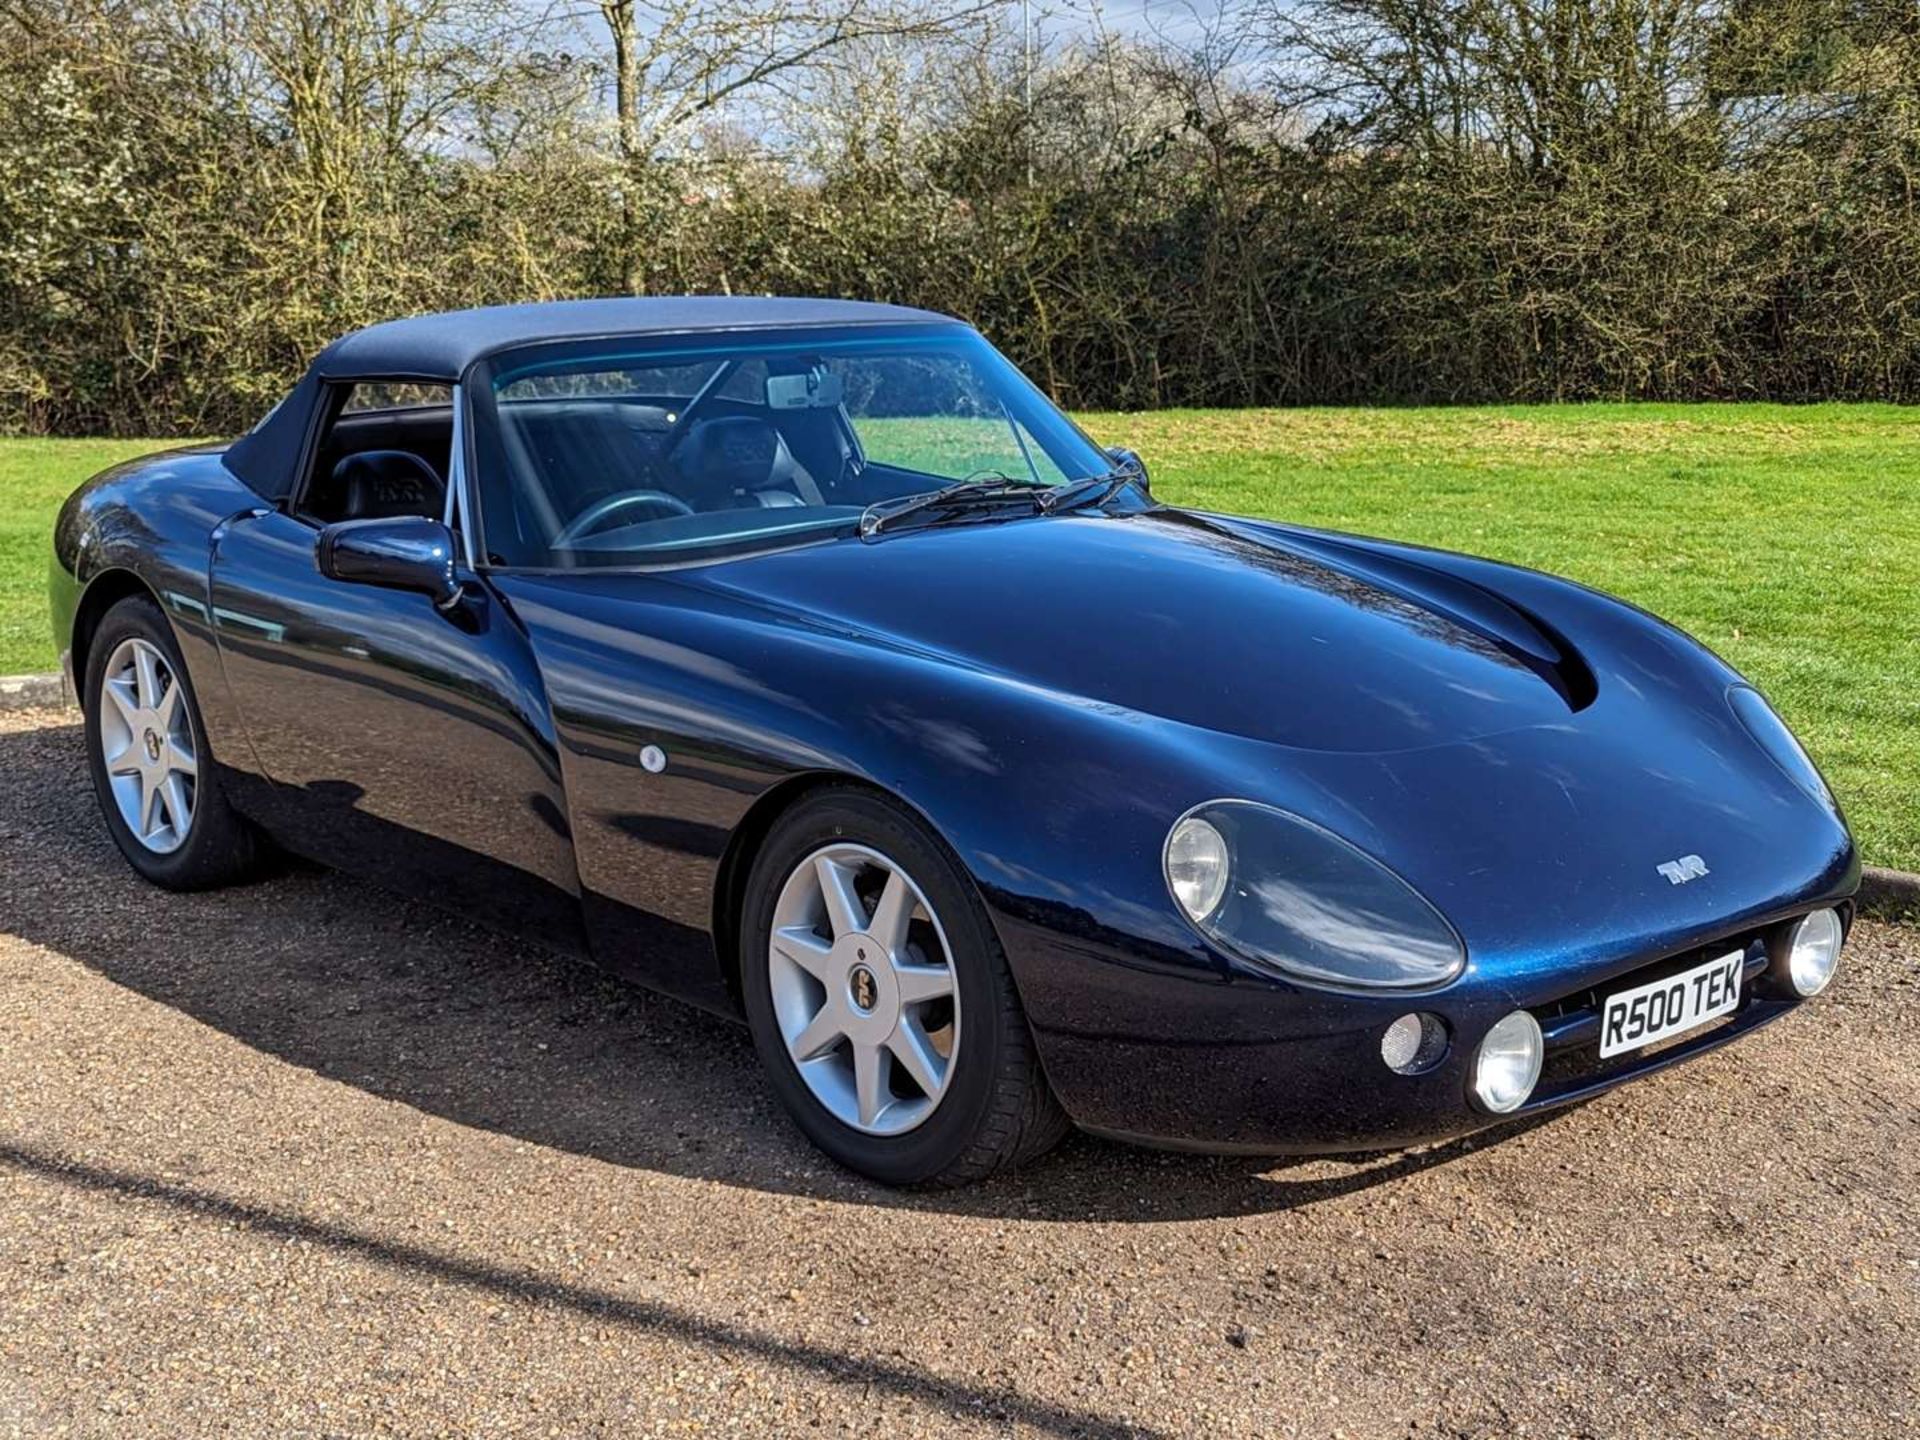 1997 TVR GRIFFITH 5.0 - Image 2 of 29